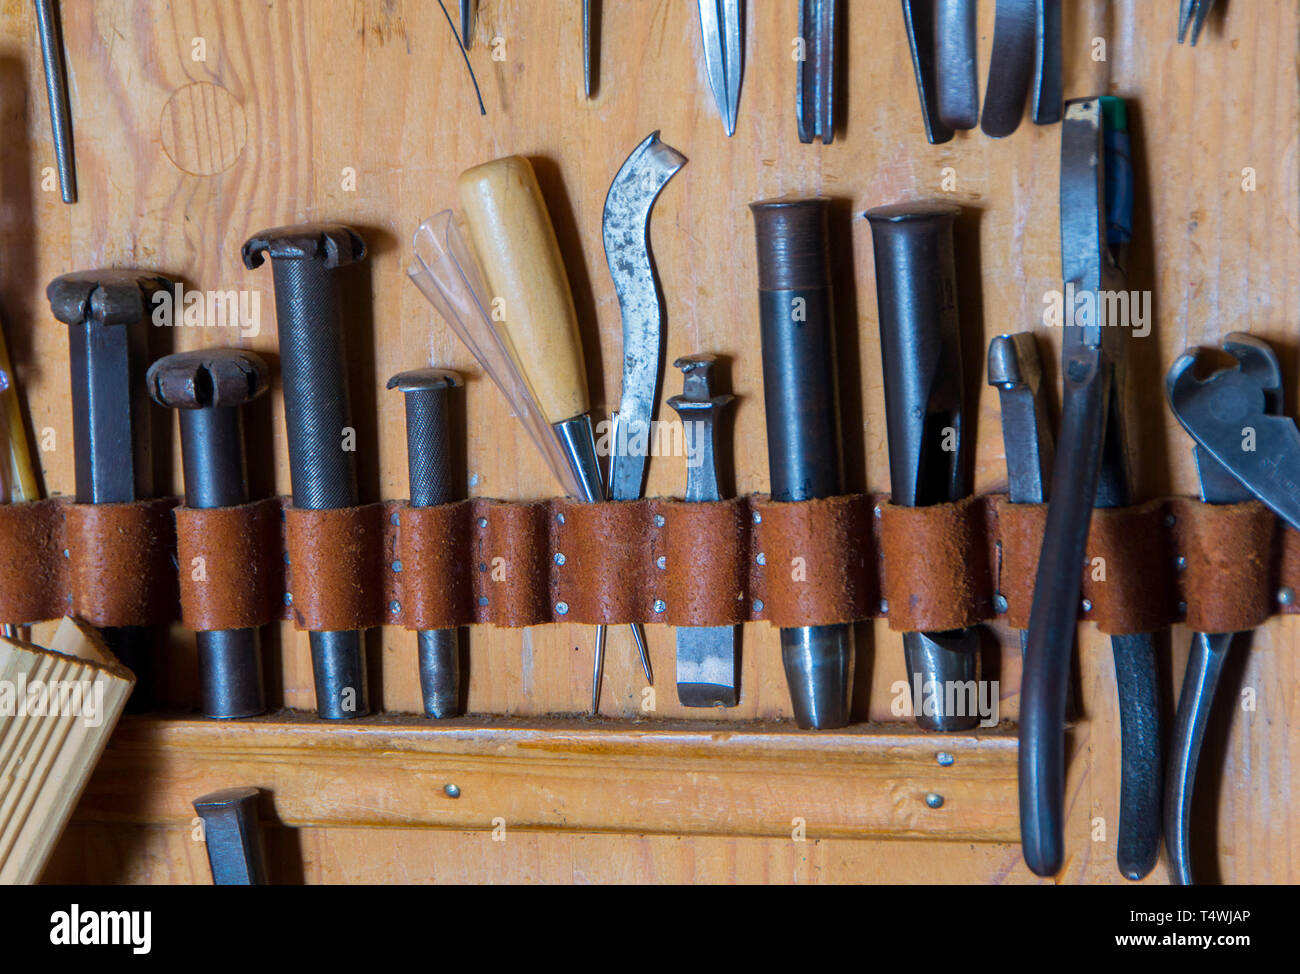 Tools For Leather Crafting And Pieces Of Brown Leather Manufacture Of  Leather Stock Photo - Download Image Now - iStock